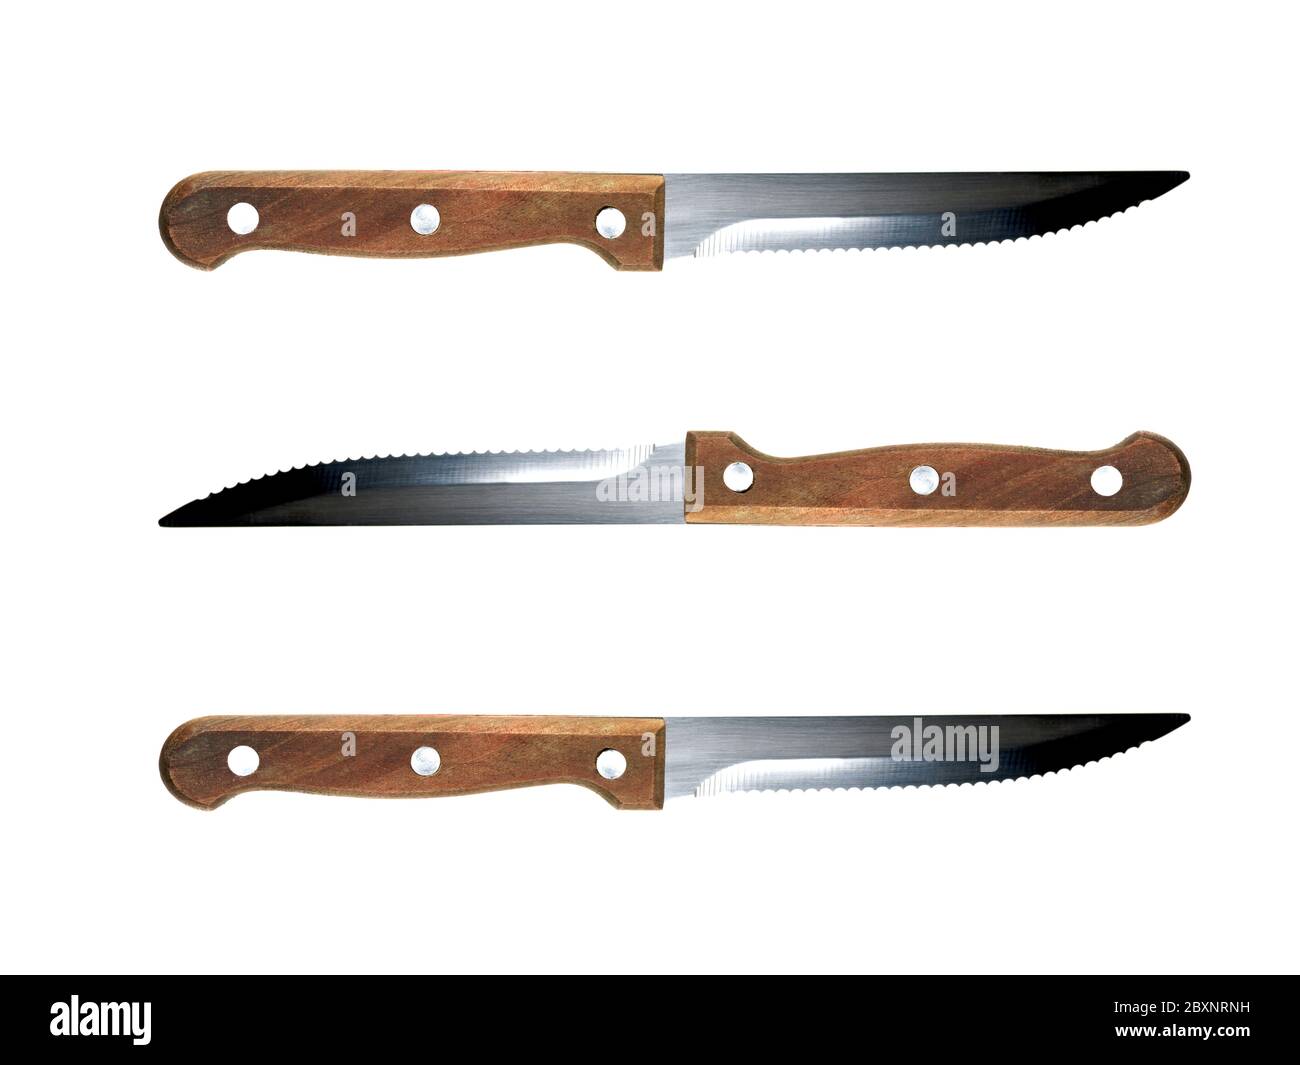 Steak knives isolated against a white background Stock Photo